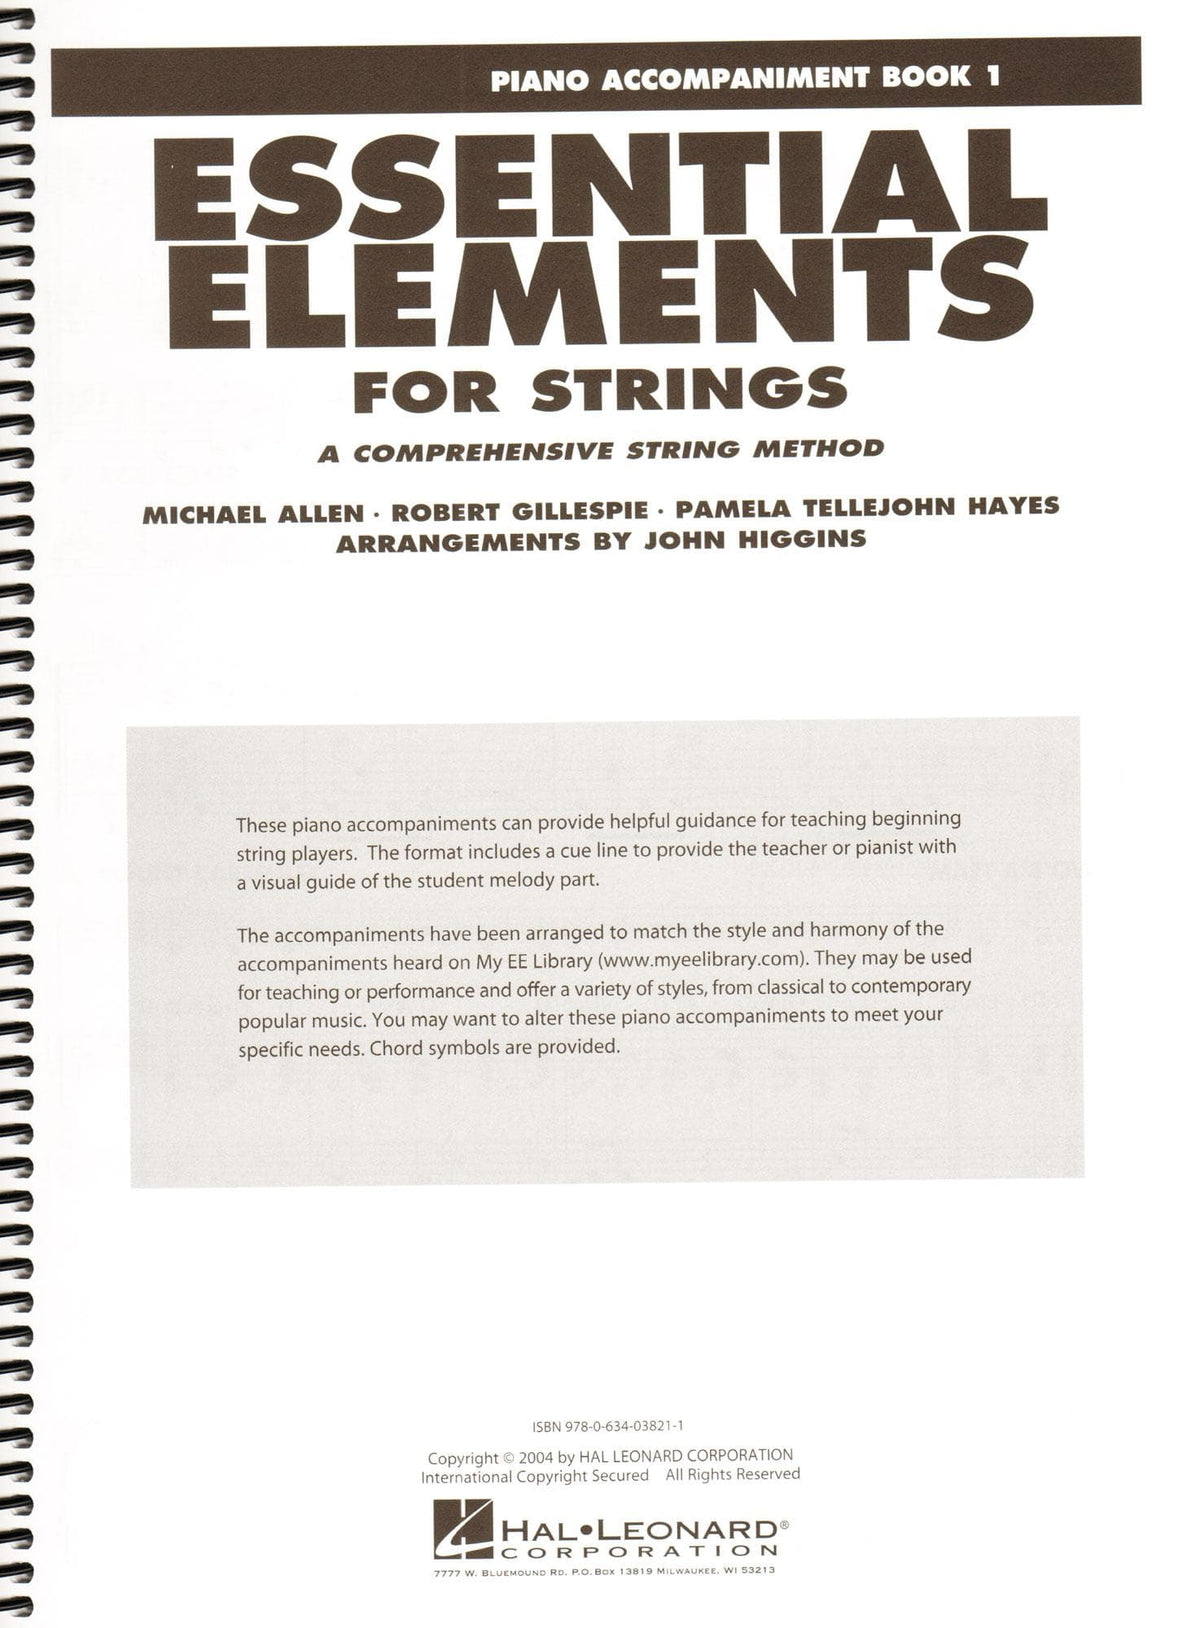 Essential Elements Interactive (formerly 2000) for Strings - Piano Accompaniment Book 1 - by Allen/Gillespie/Hayes - Hal Leonard Publication